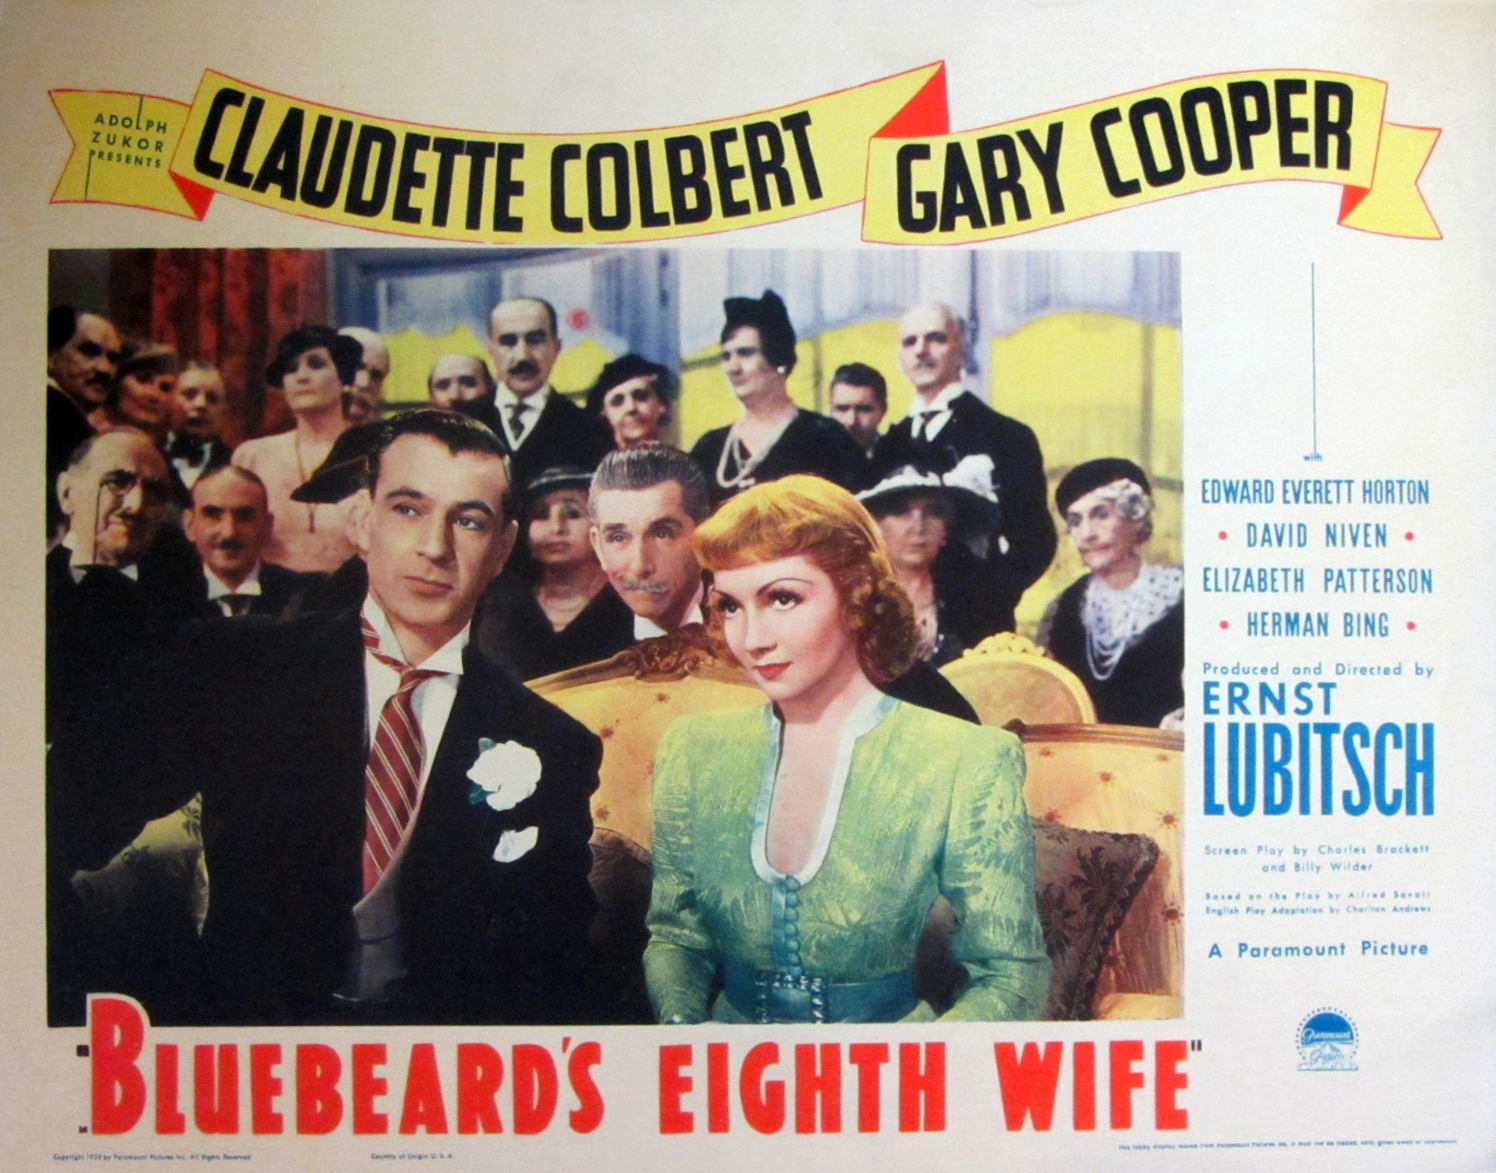 Bluebeards Eighth Wife 1938 directed by Ernst Lubitsch